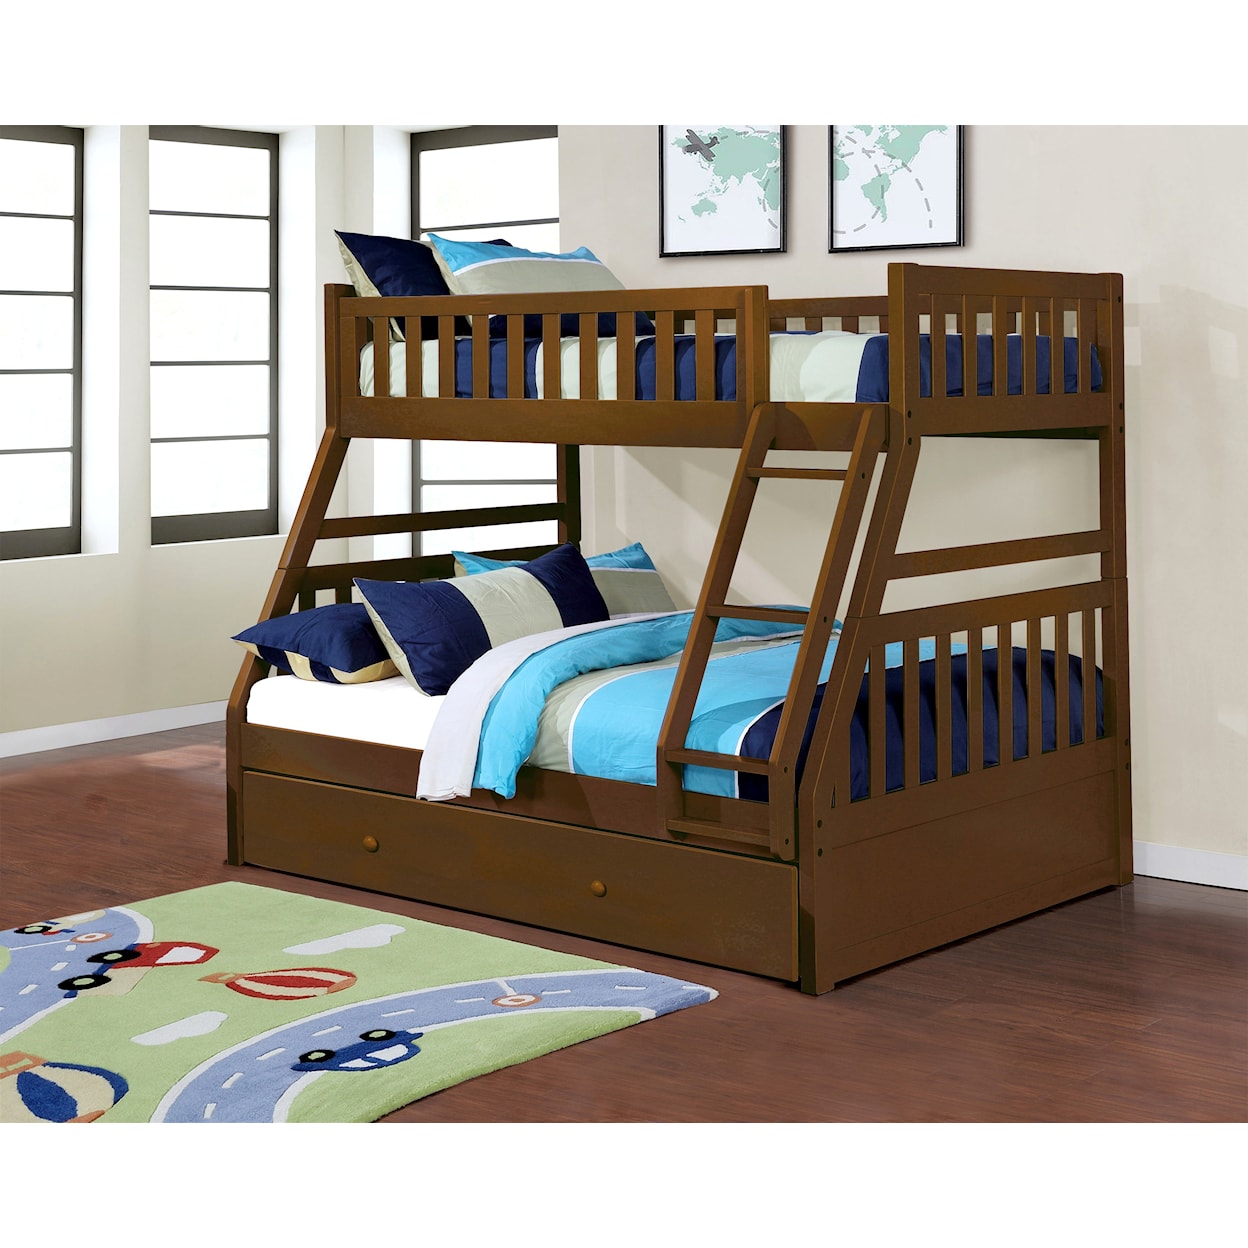 Lifestyle Shira Twin Over Full Bunk Bed with Storage